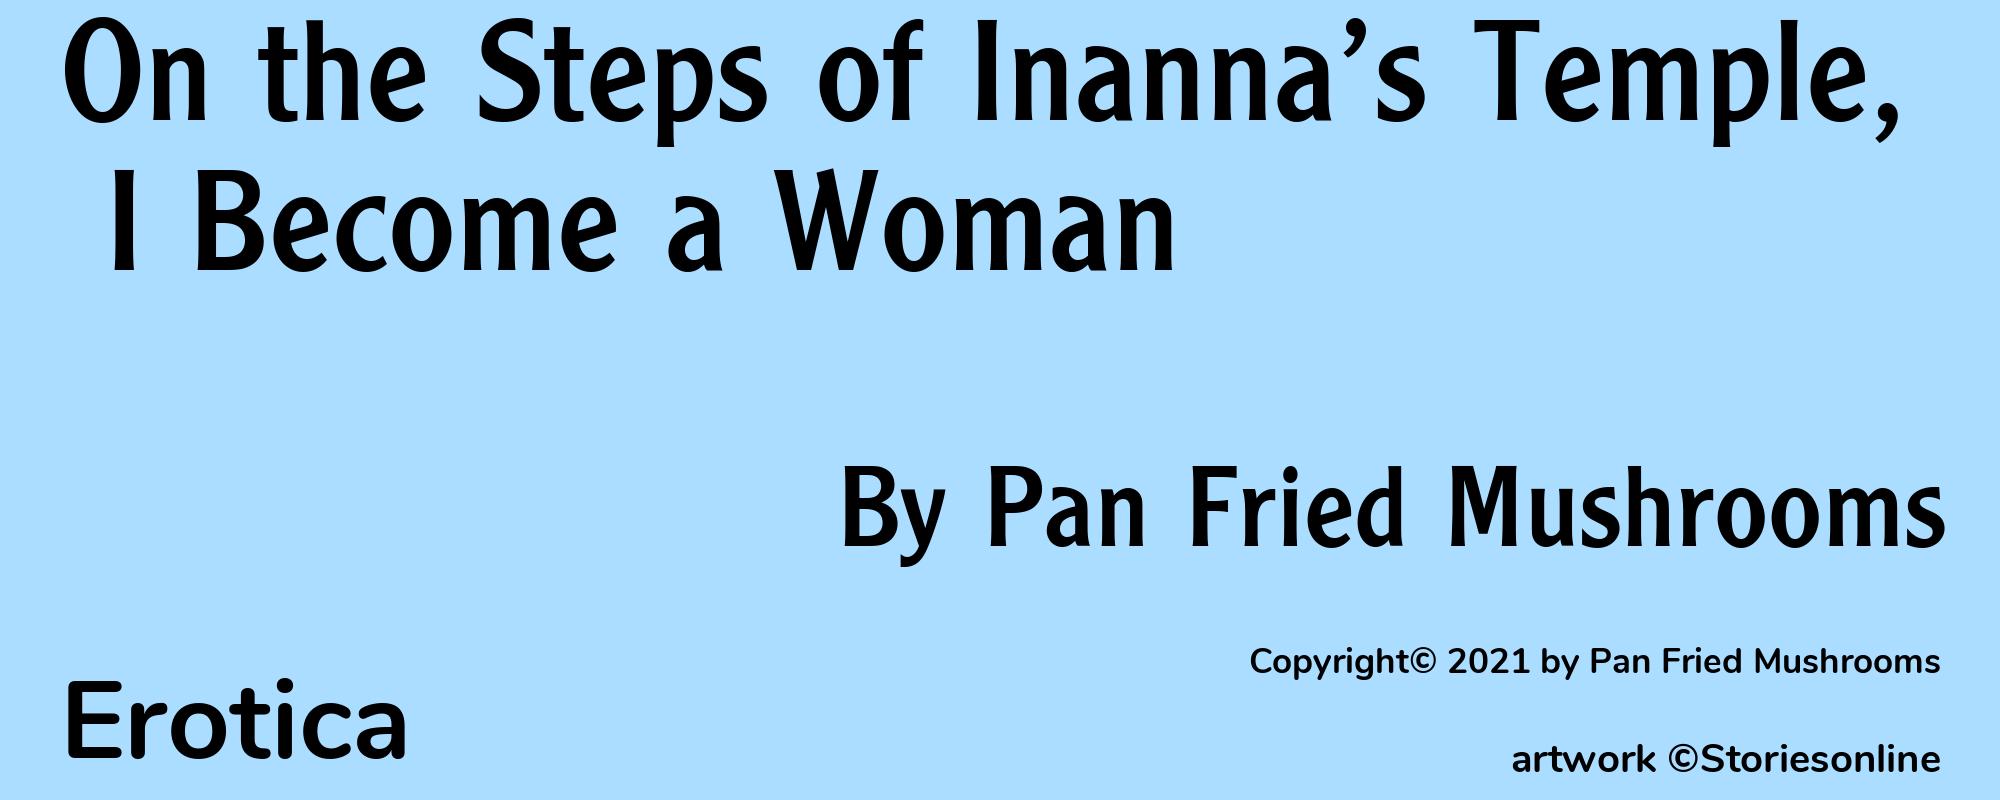 On the Steps of Inanna’s Temple, I Become a Woman - Cover